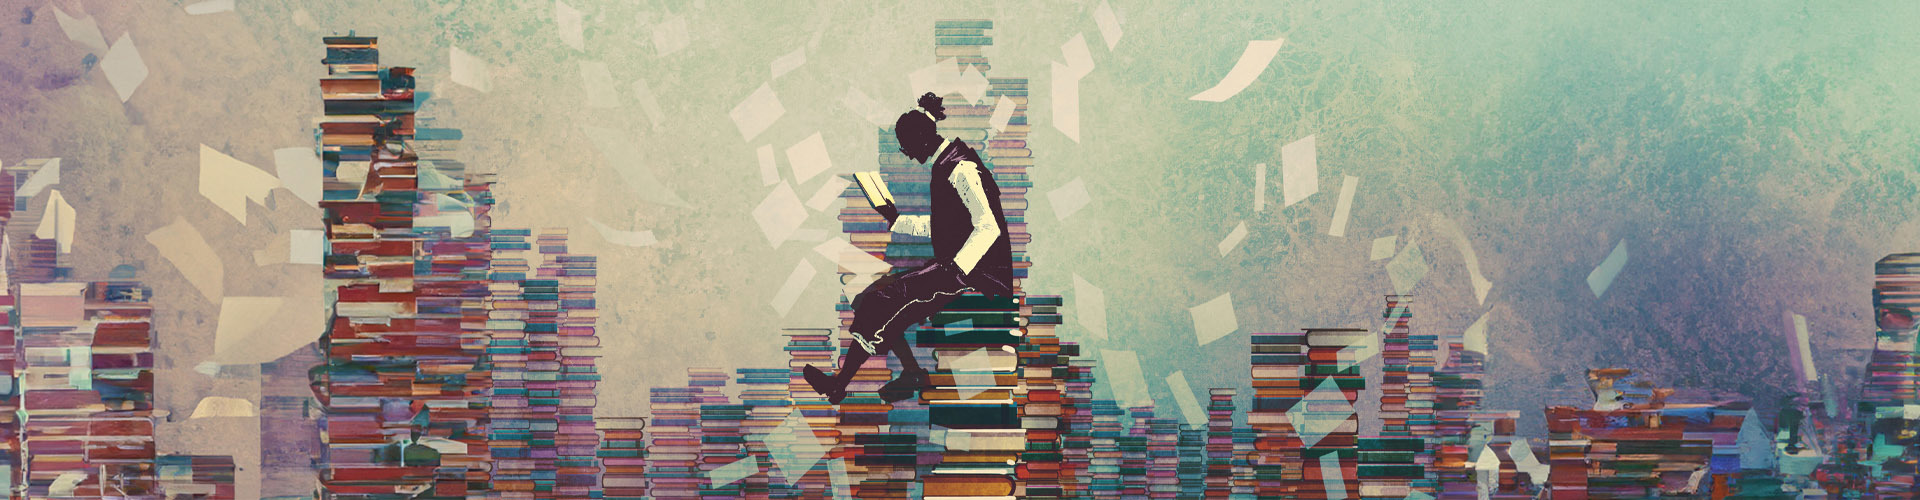 illustration of a person reading, surrounded by stacks of books.